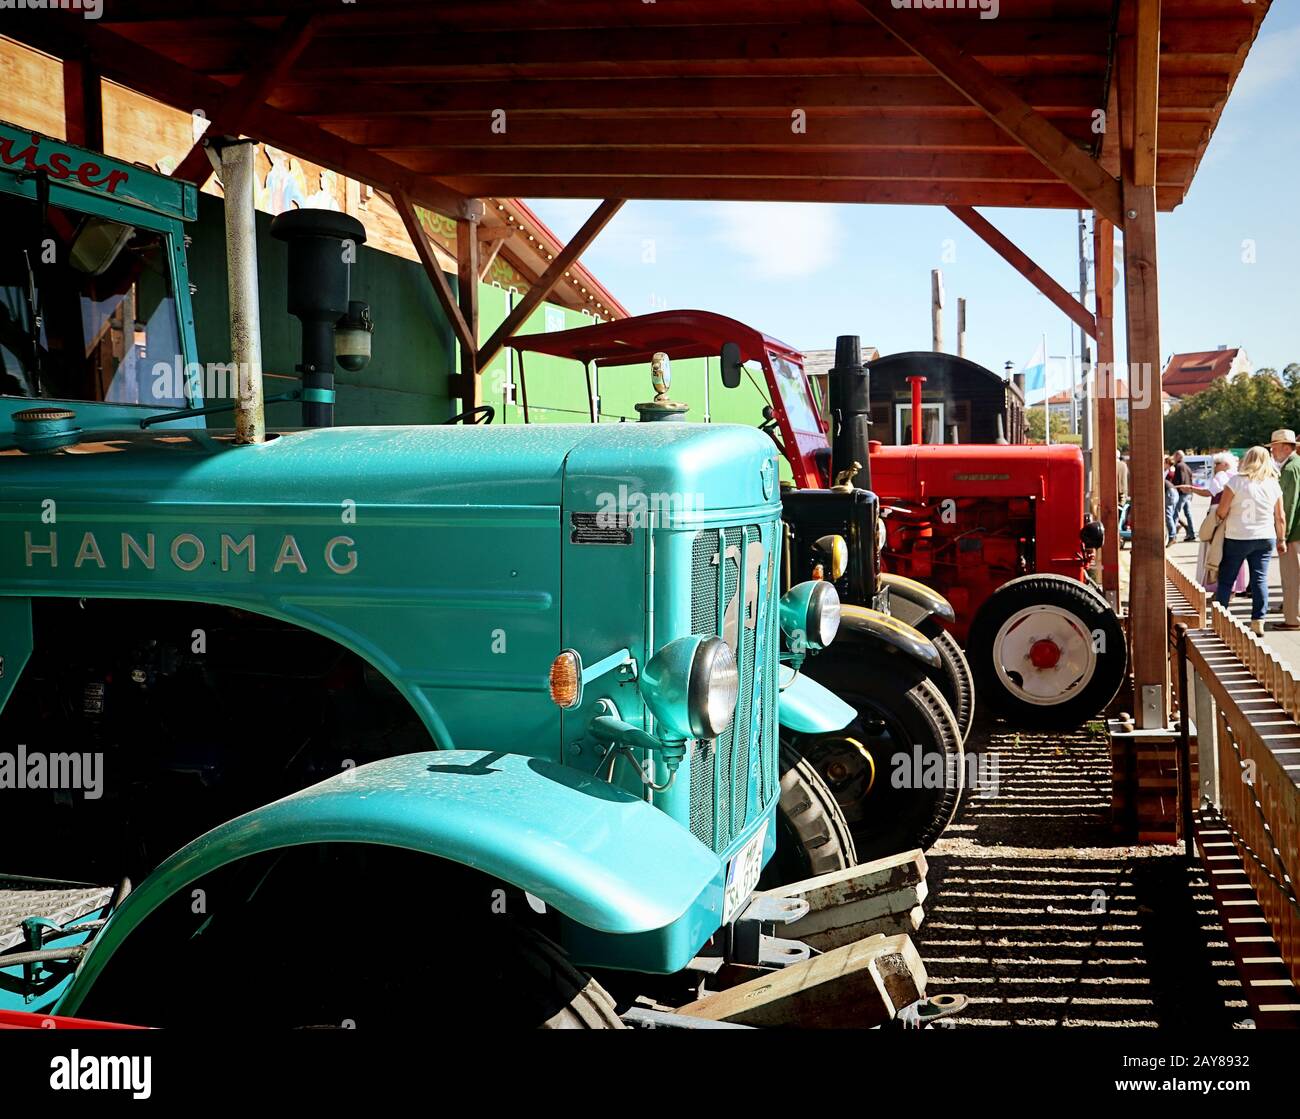 MUNICH, GERMANY Hanomag vintage tractor on display at Oide Wiesn historical part of the Oktoberfest in Munich,a family and child-friendly environment. Stock Photo